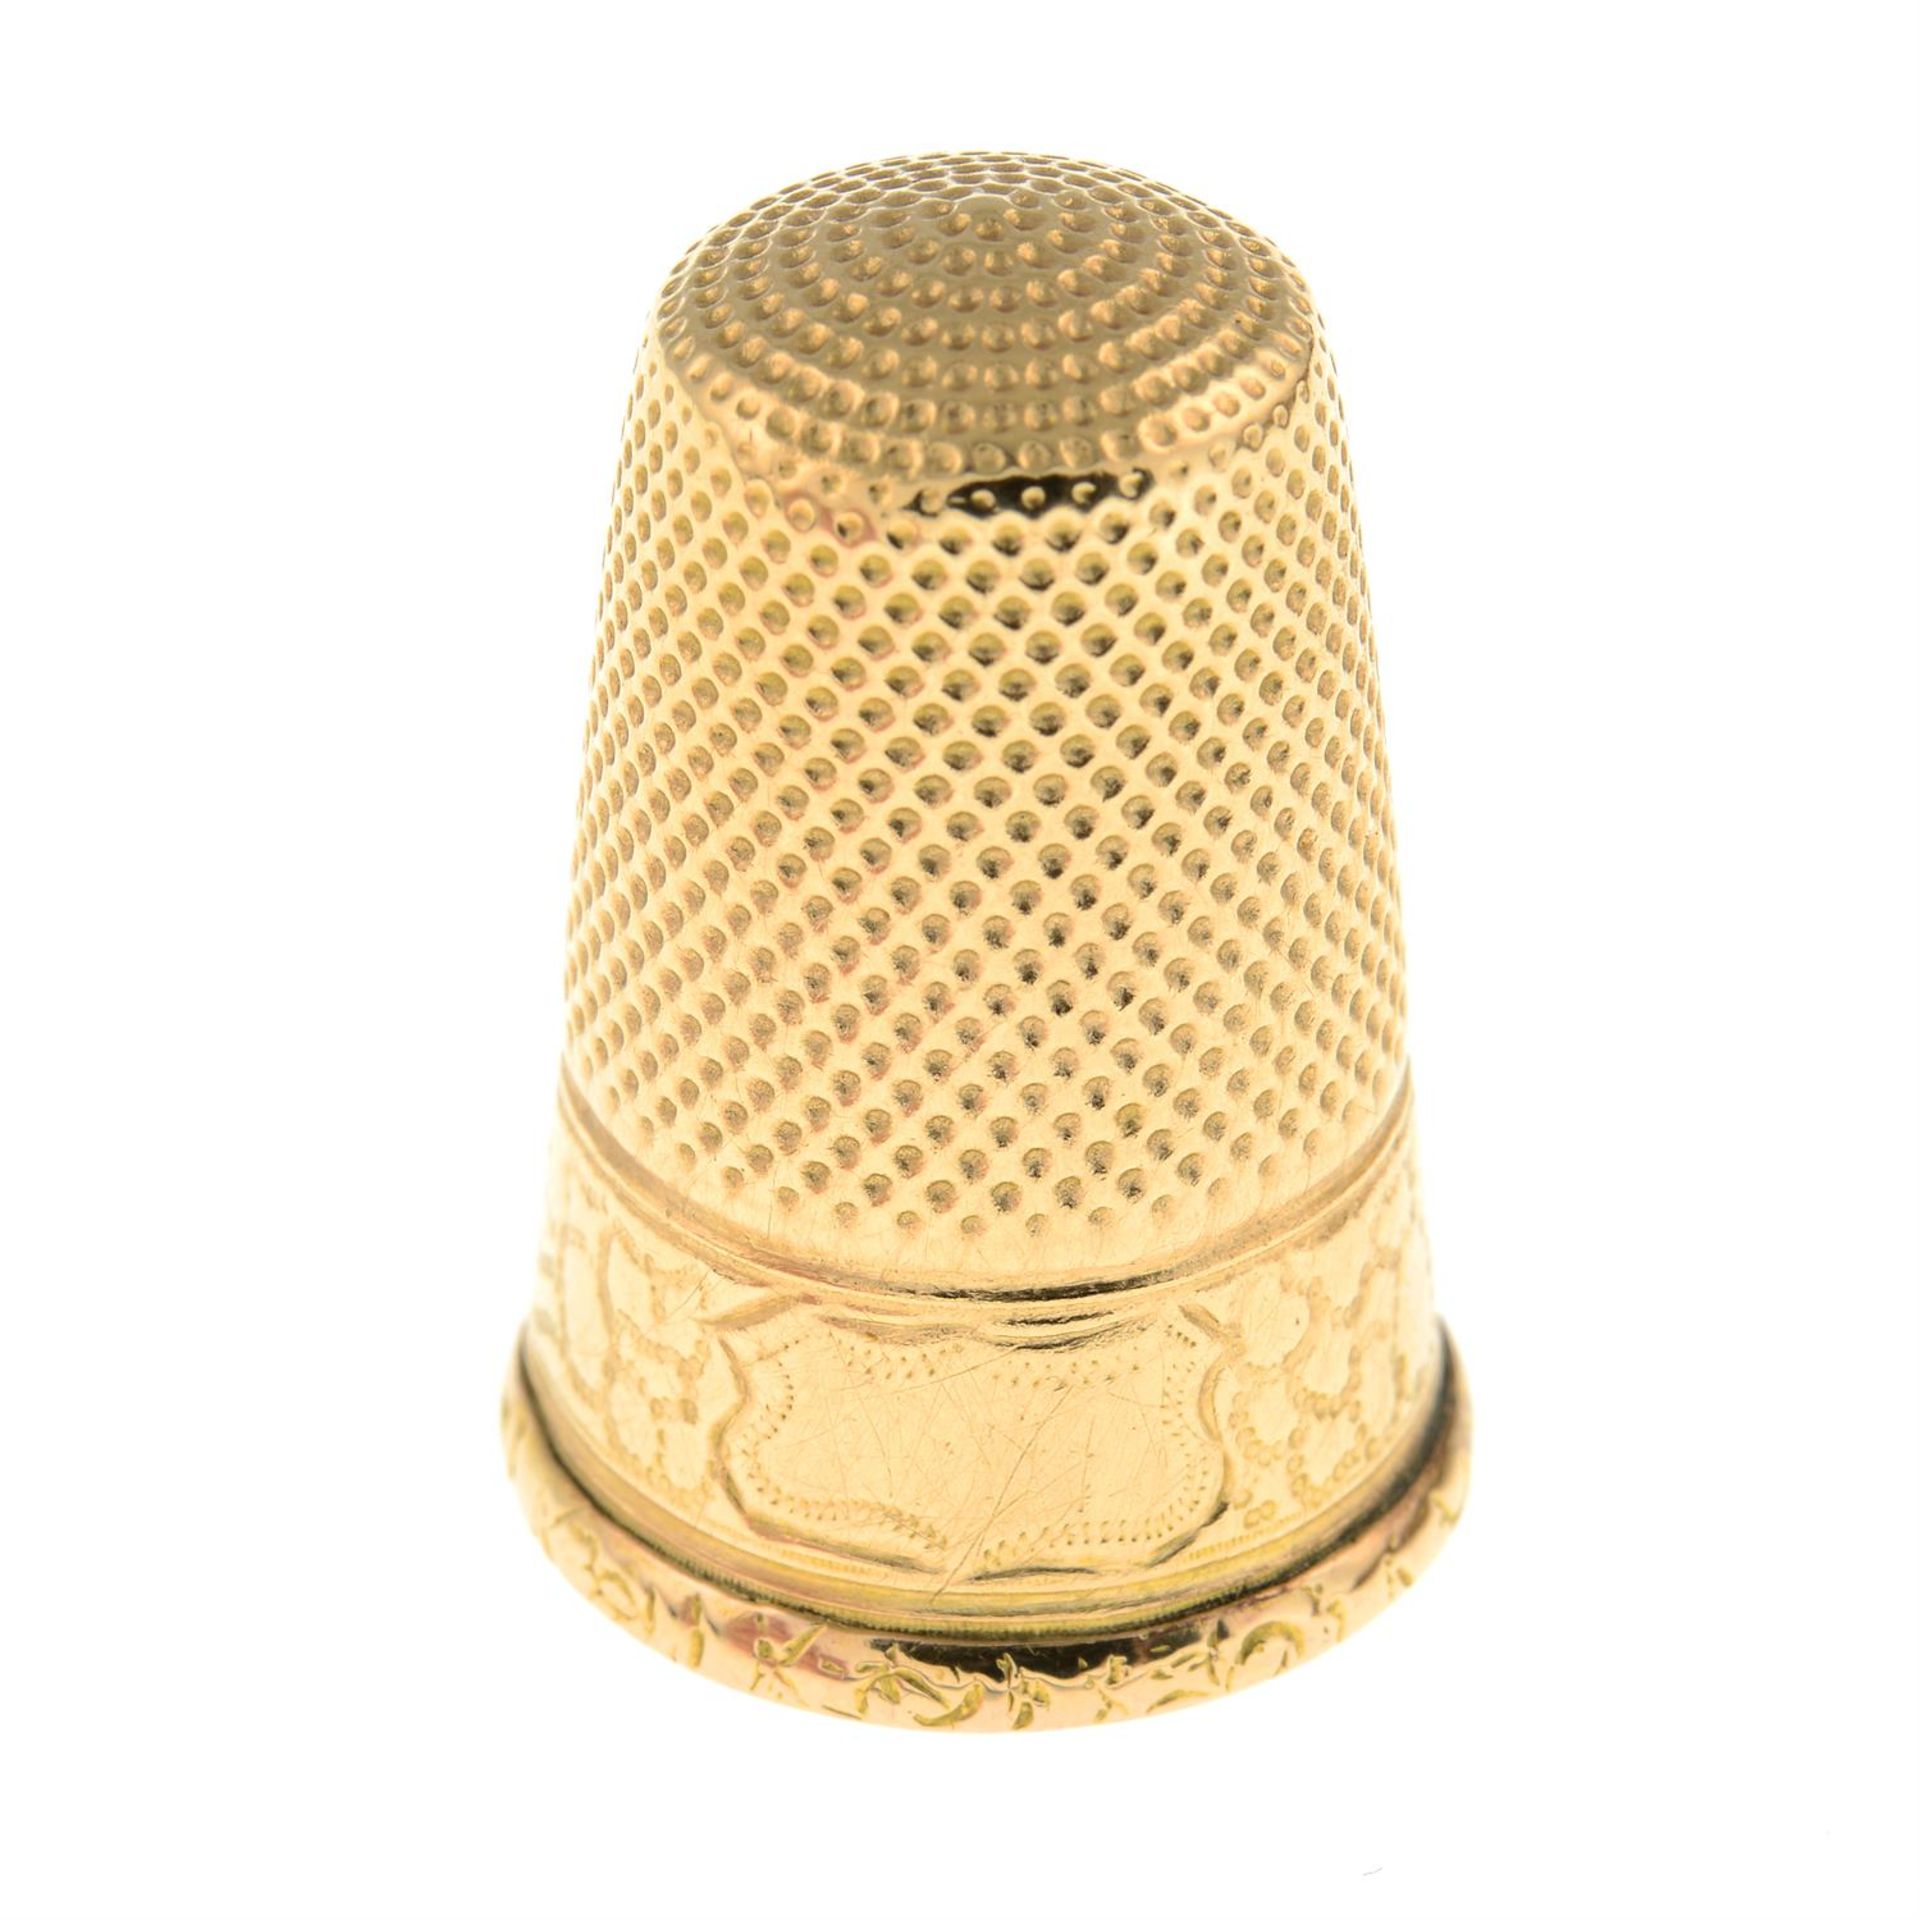 Early 20th century gold thimble.